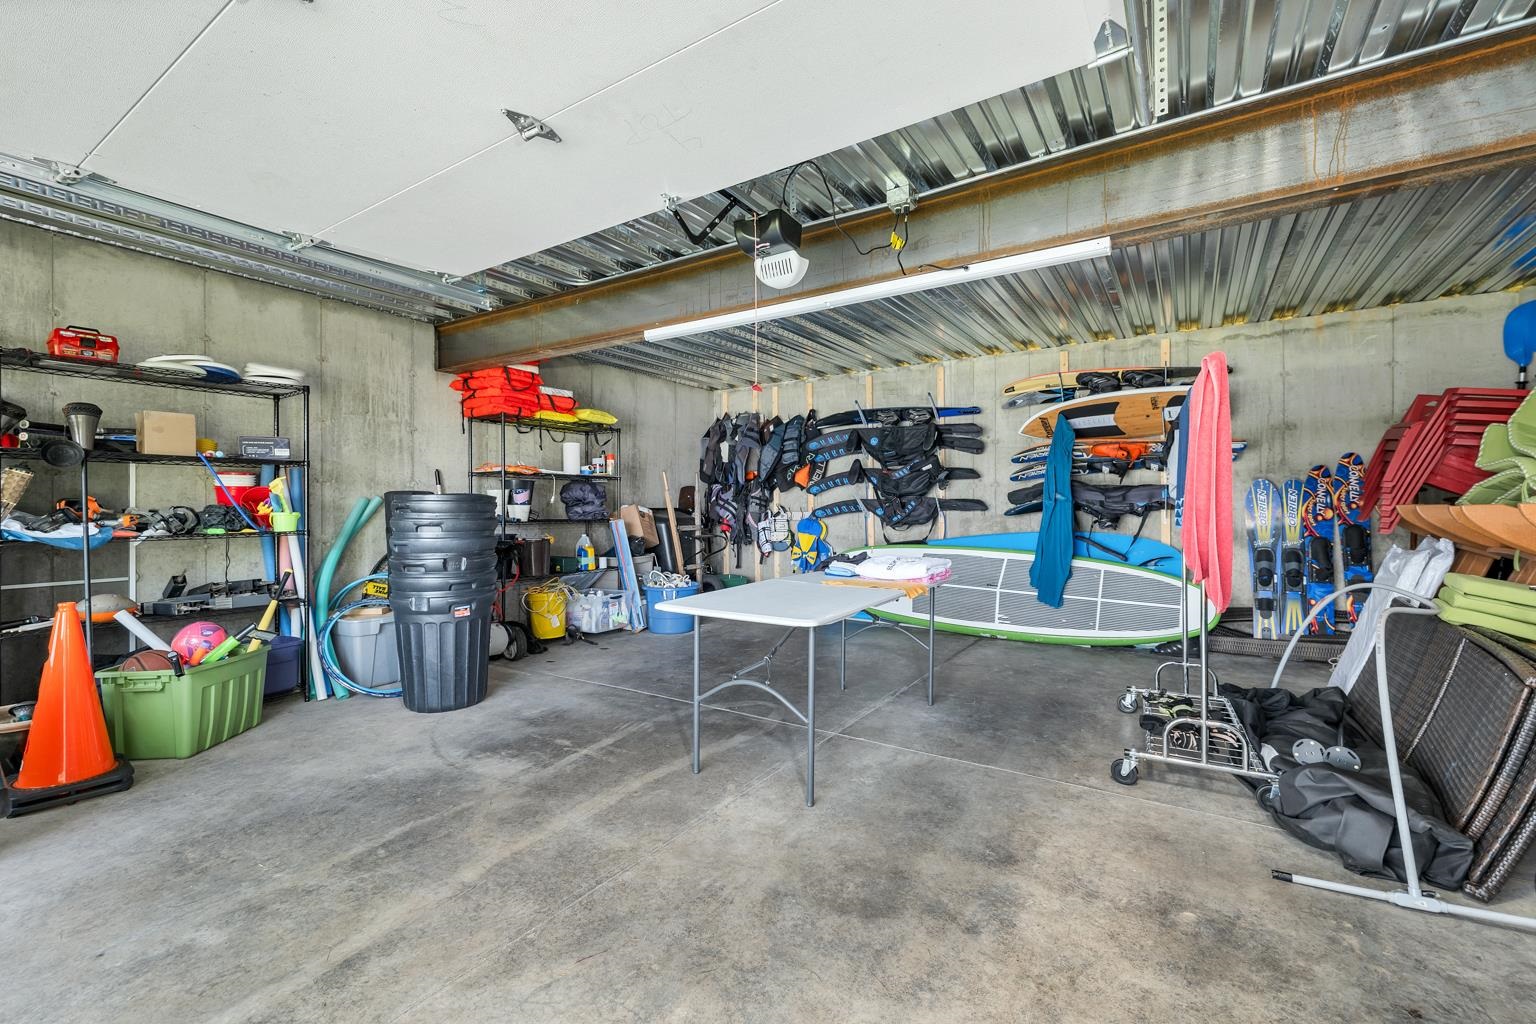 Lakeside under garage perfect space to store your water toys, easy access to boats and waterfront